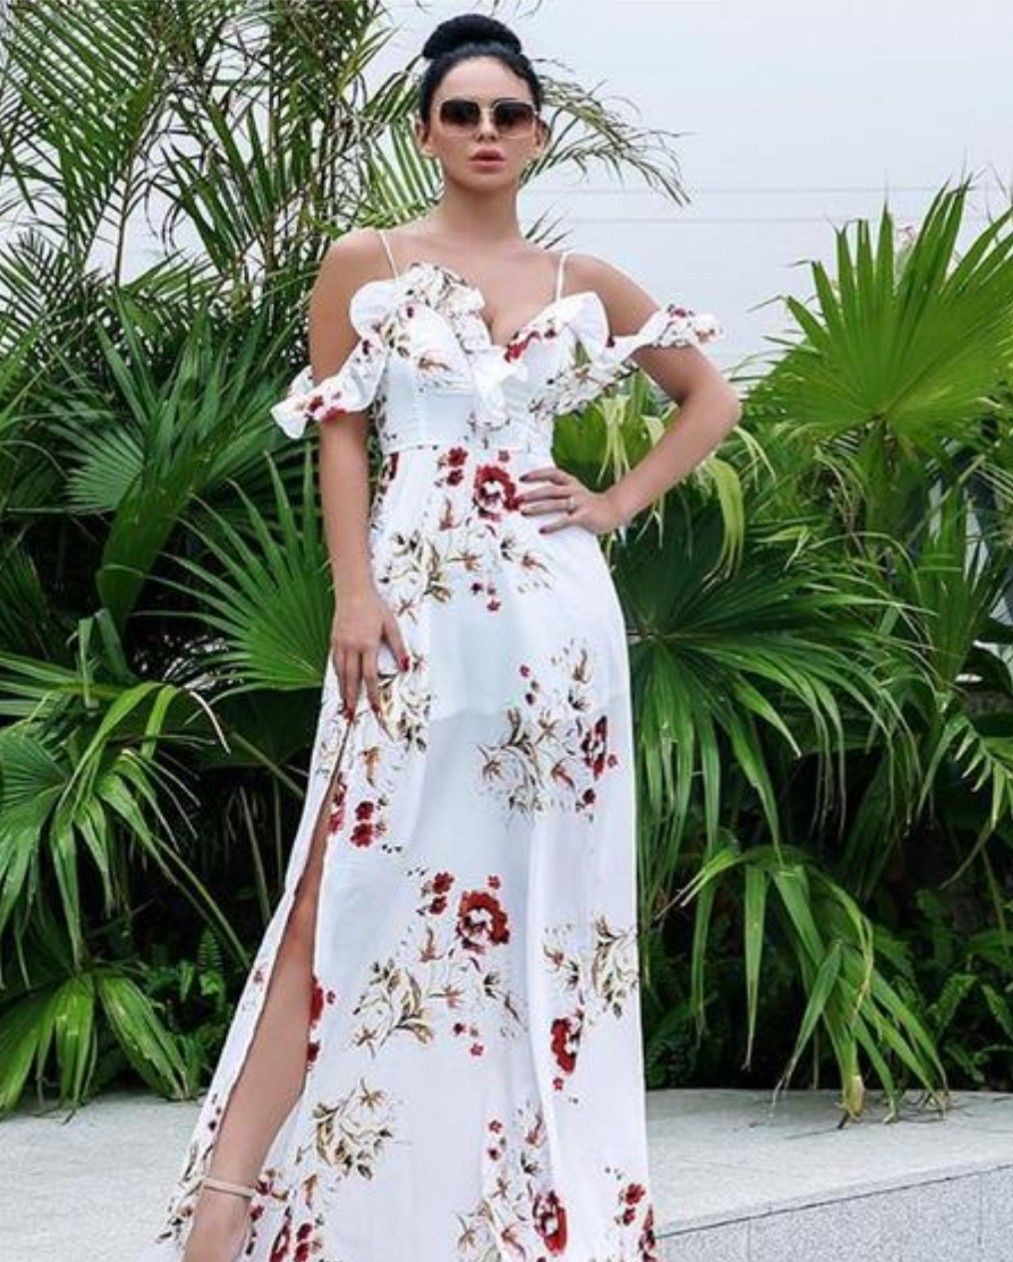 Maxi dress Boho Outfit Ideas, Party dress: party outfits,  Backless dress,  Wedding dress,  Clothing Ideas,  Maxi dress,  Boho Outfit  